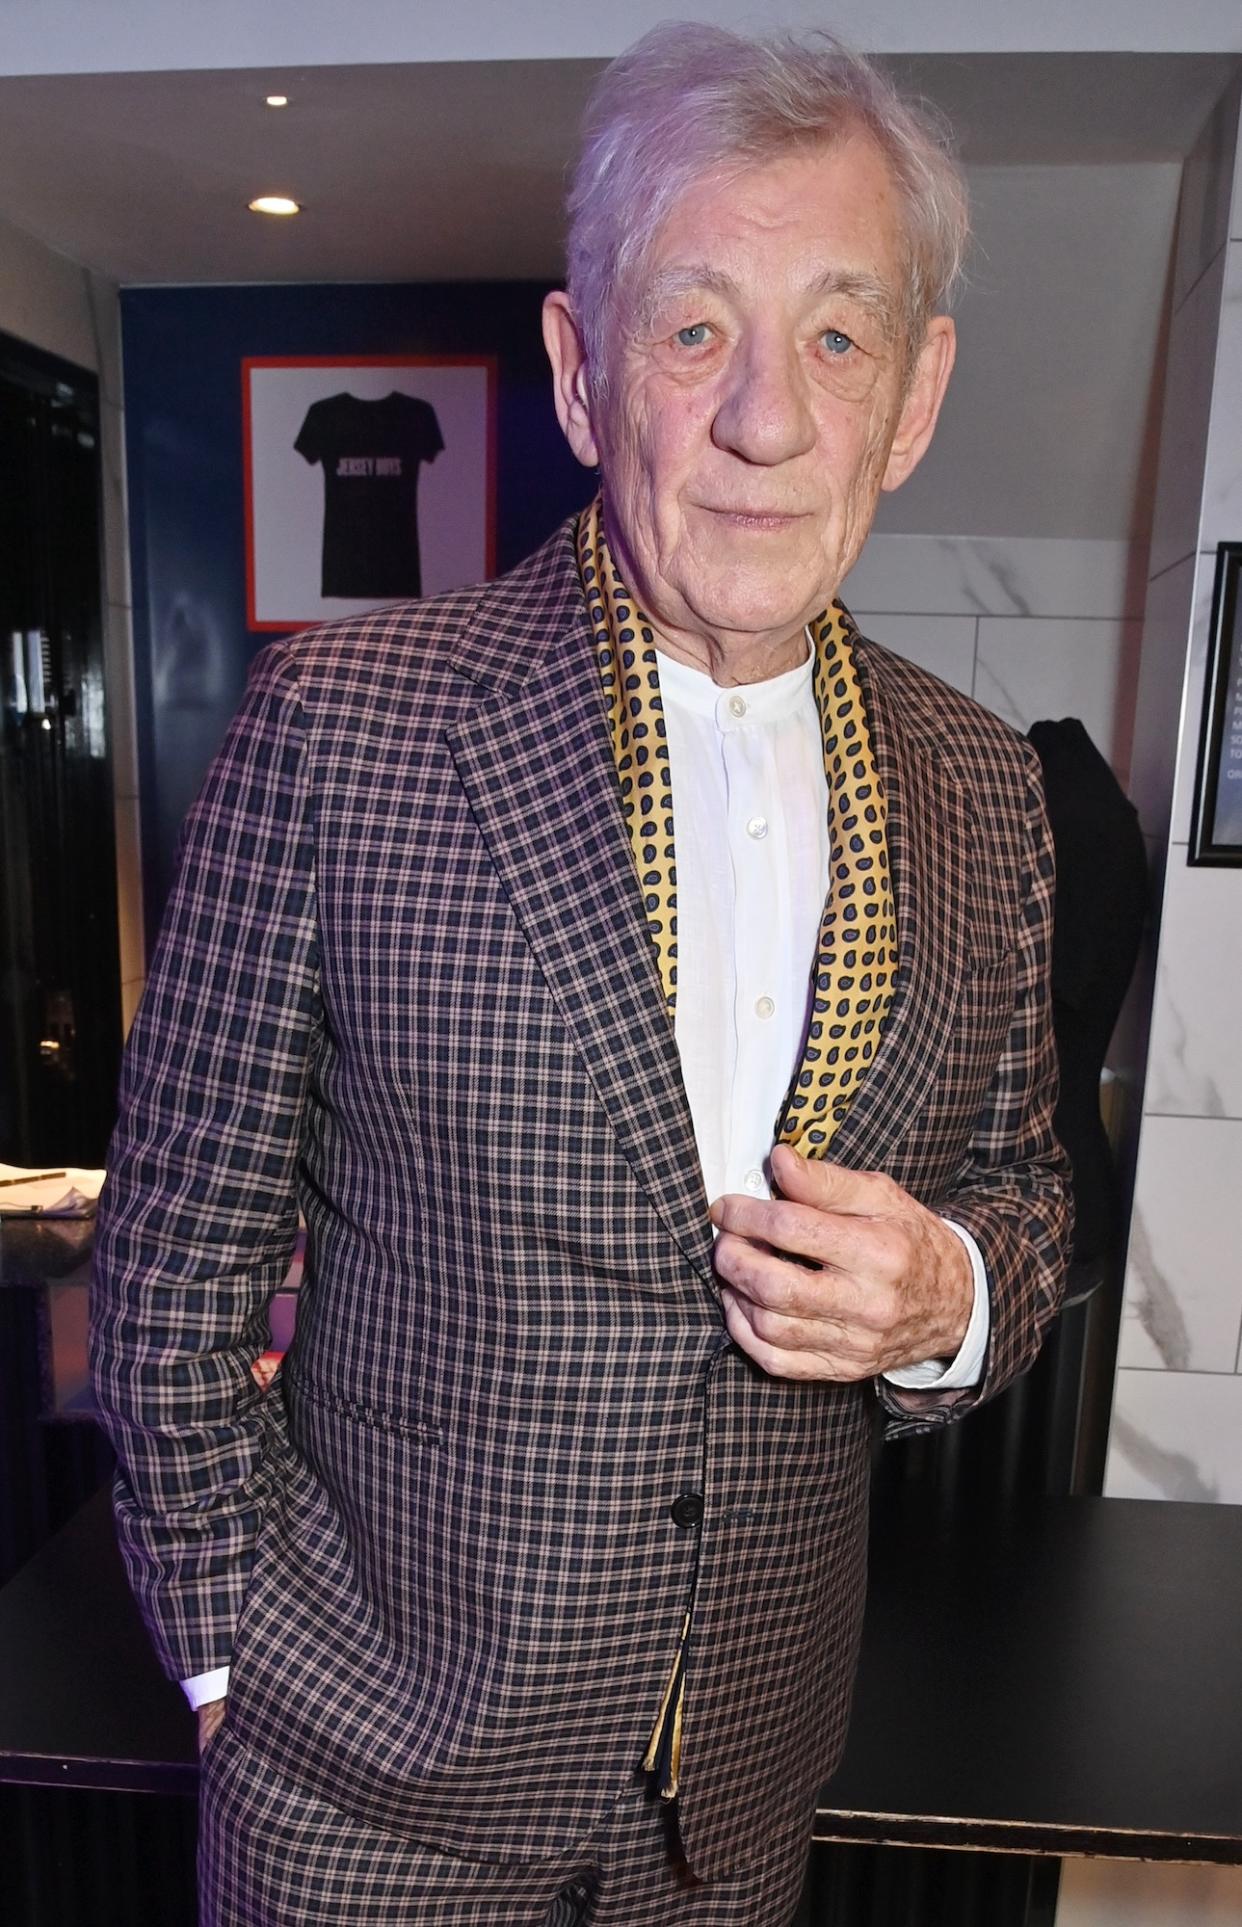 Ian McKellen Injured His Wrist and Neck in London Stage Fall